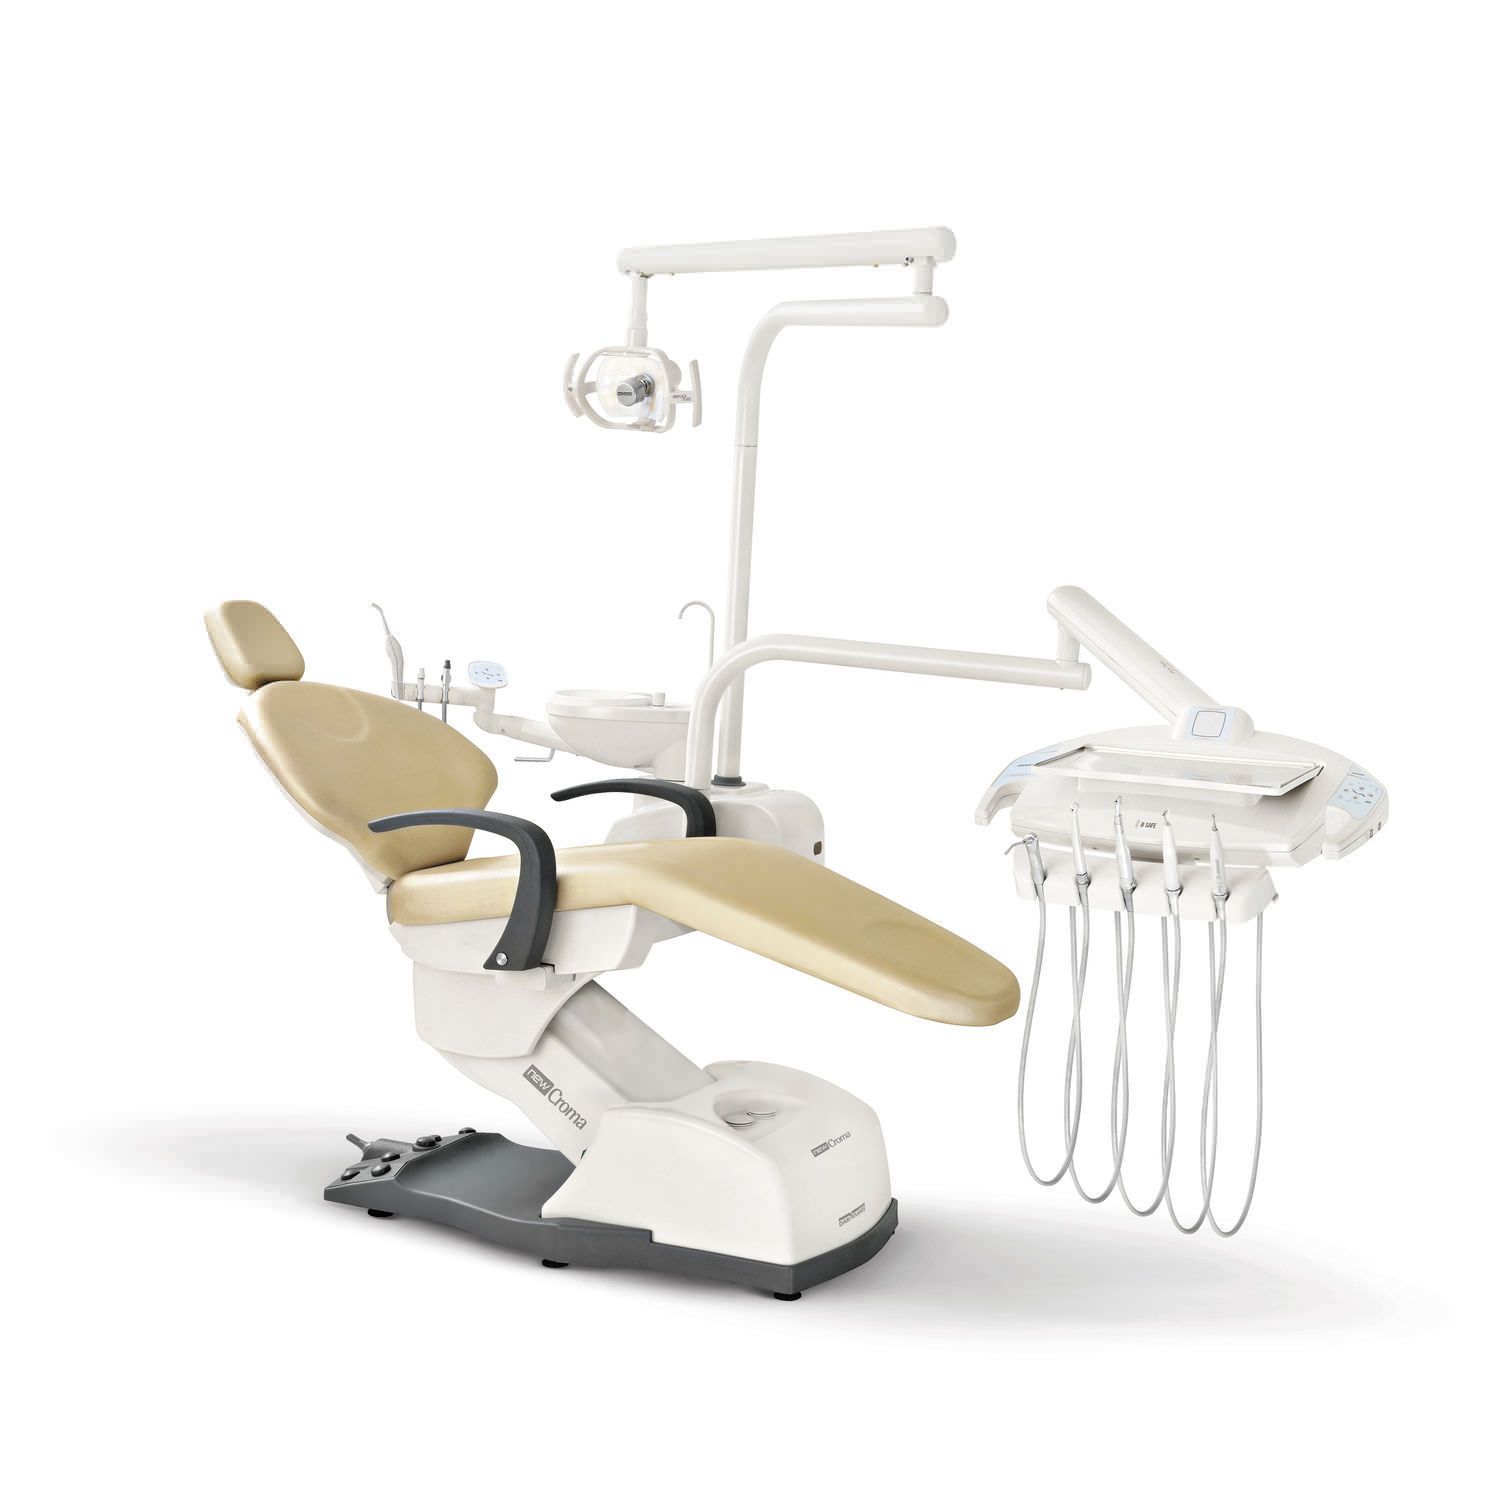 Dental treatment unit with lamp / with delivery system CROMA TECHNO 2203 DABI ATLANTE